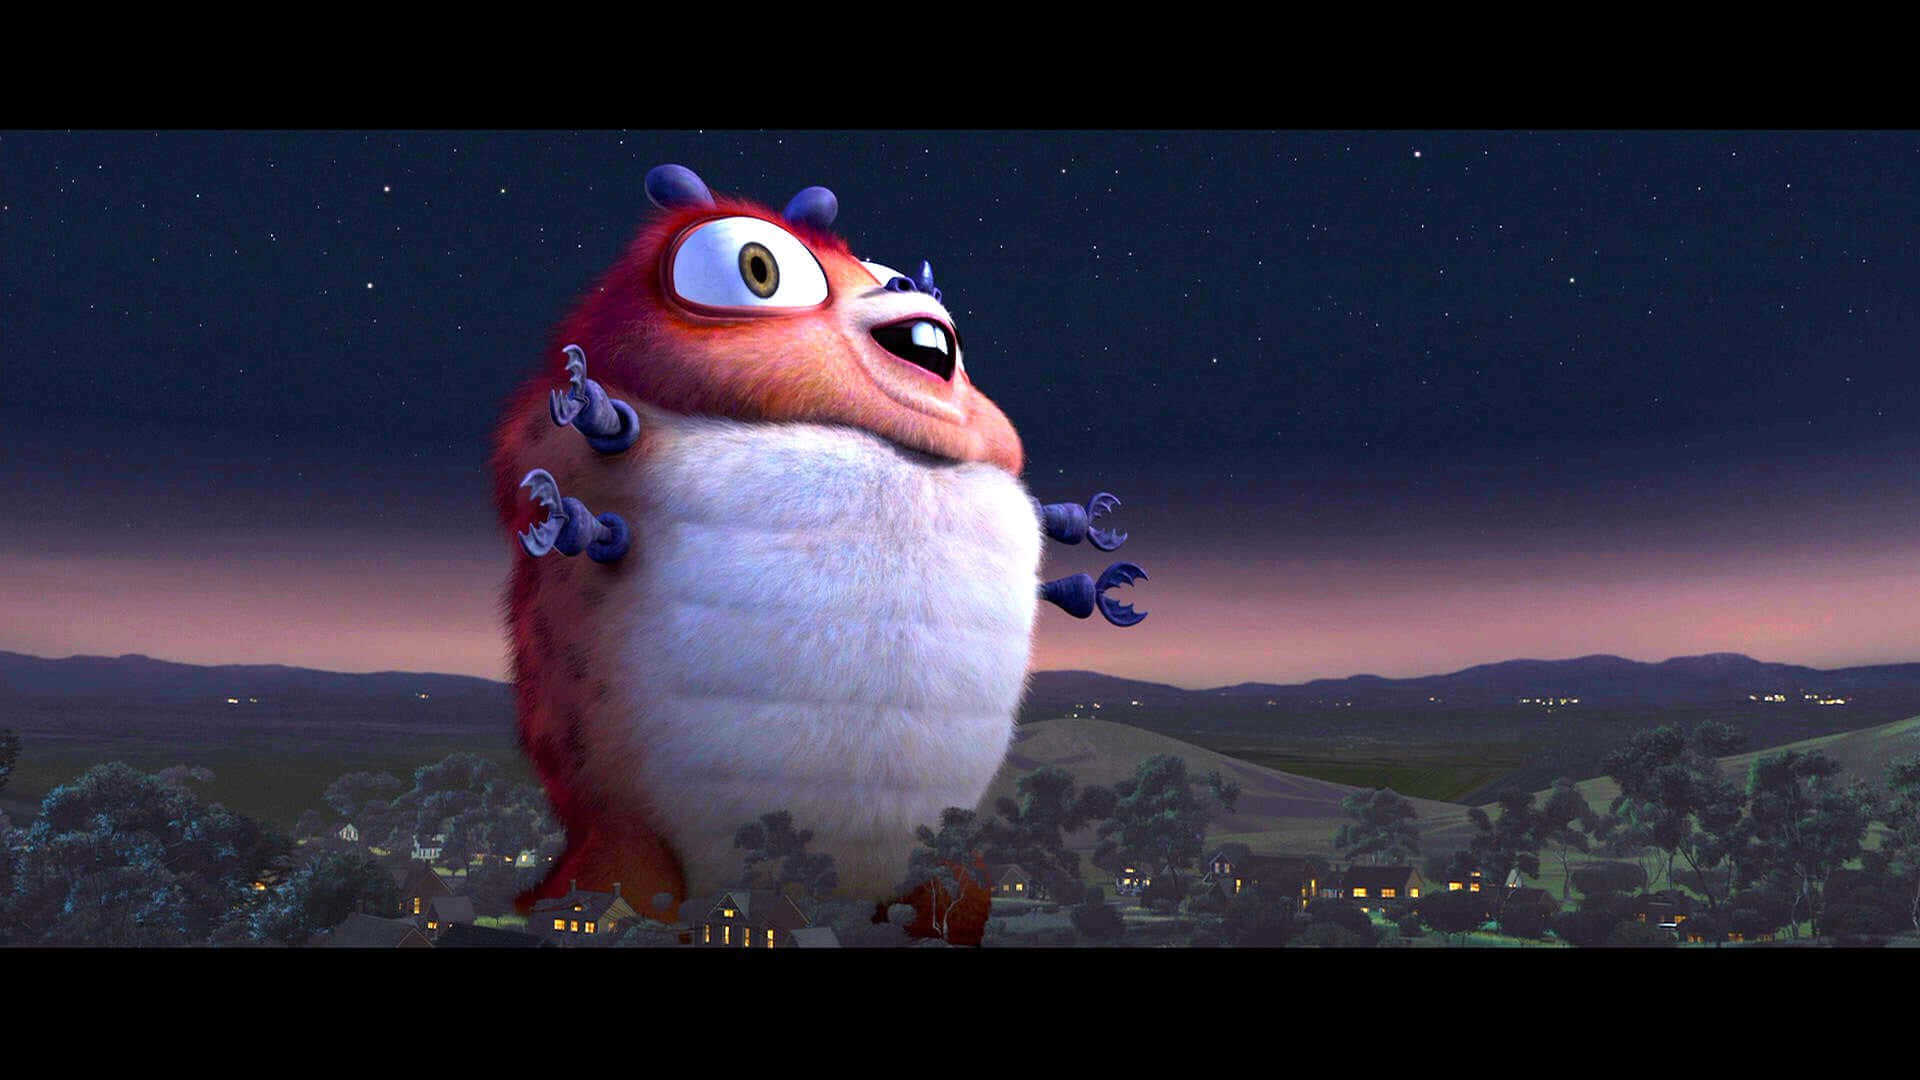 Giant Insectosaurus from Monsters Vs Aliens Movie Wallpaper